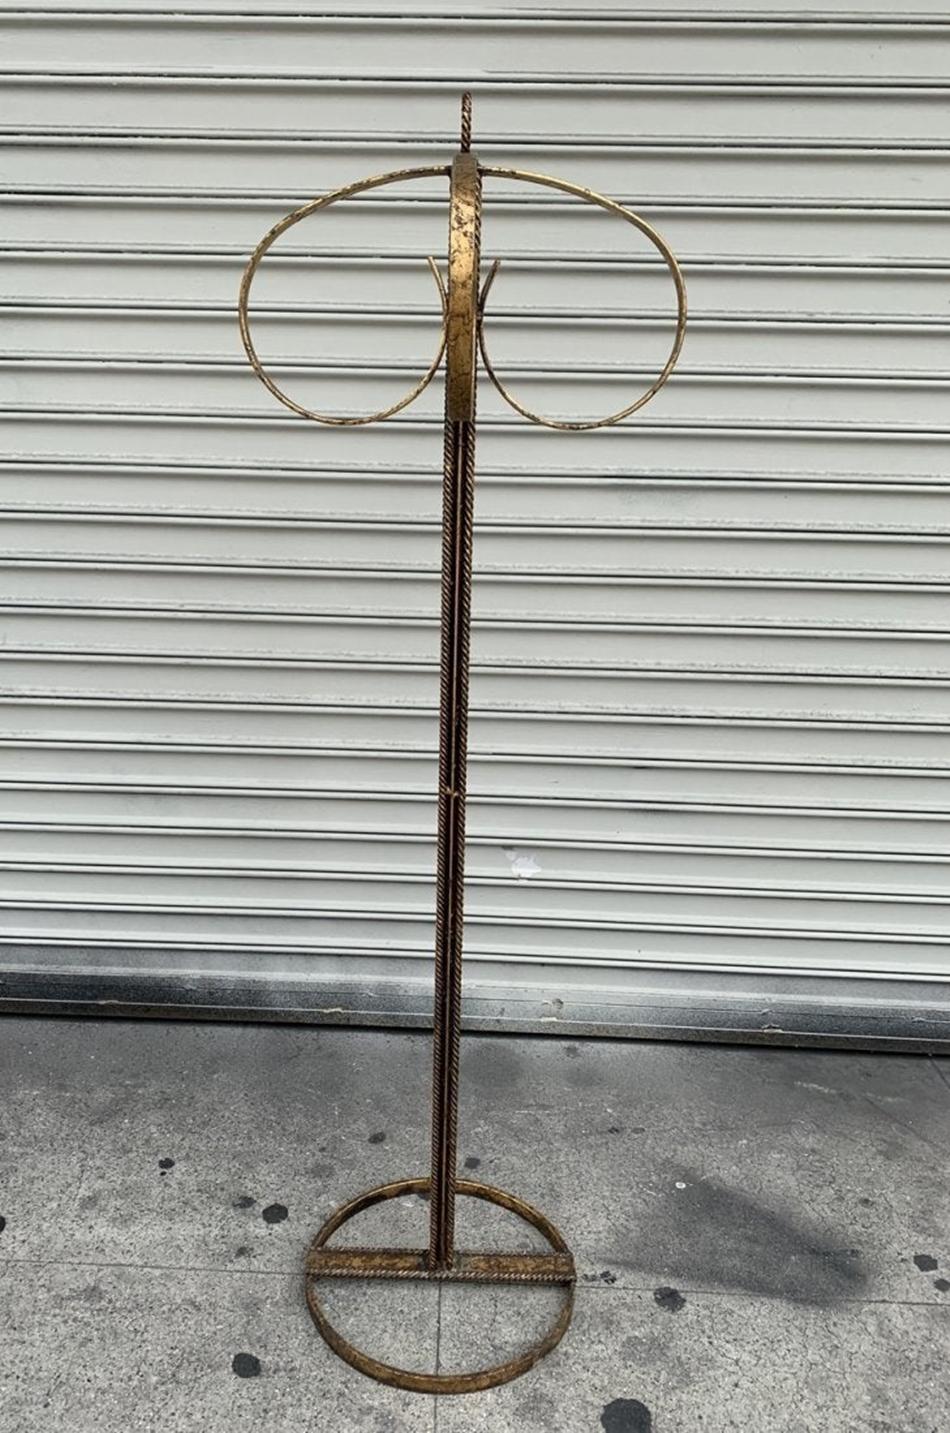 Beautiful wrought iron stand fully gilded in gold, the piece is substantial and size and a delicate in appearance, the combination of flat and twisted metal works very well and the gold leaf is the acing on the cake.
The piece is more likely